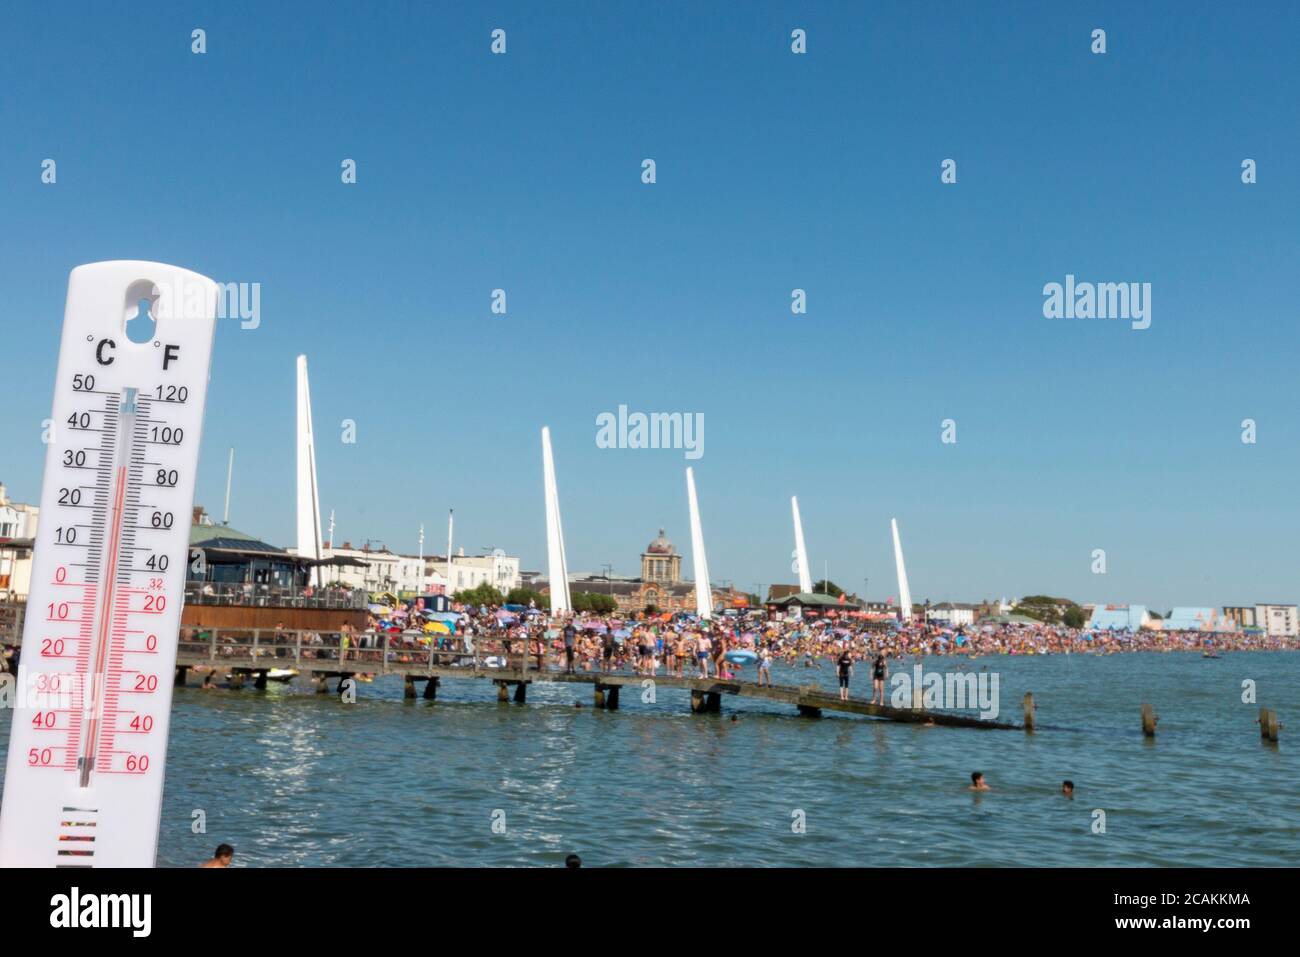 Busy beach on a hot day in Southend on Sea, Essex, UK during the COVID-19 Coronavirus pandemic. Thermometer reading 32 Celsius. People Stock Photo